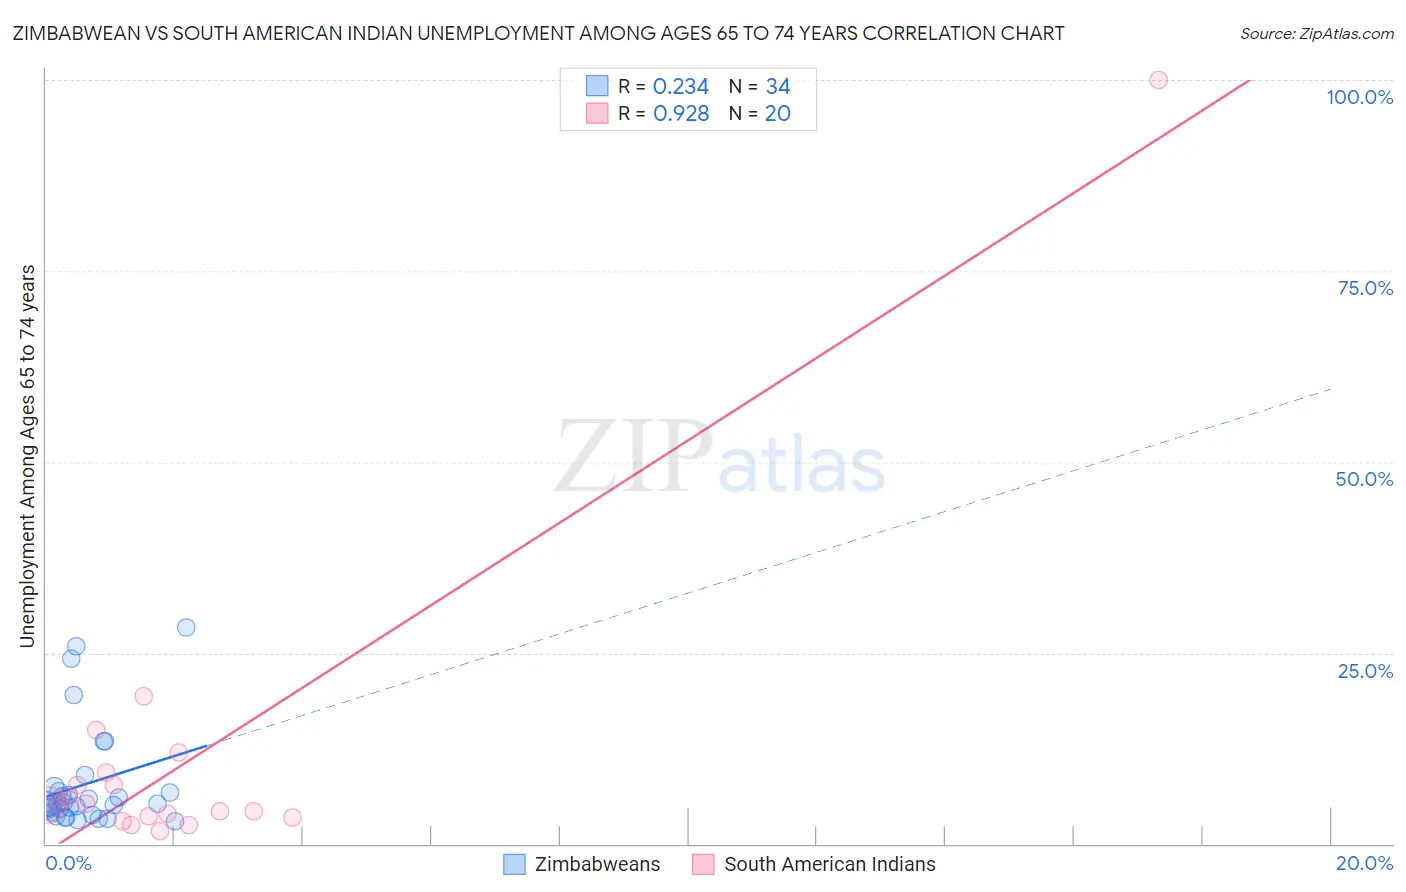 Zimbabwean vs South American Indian Unemployment Among Ages 65 to 74 years